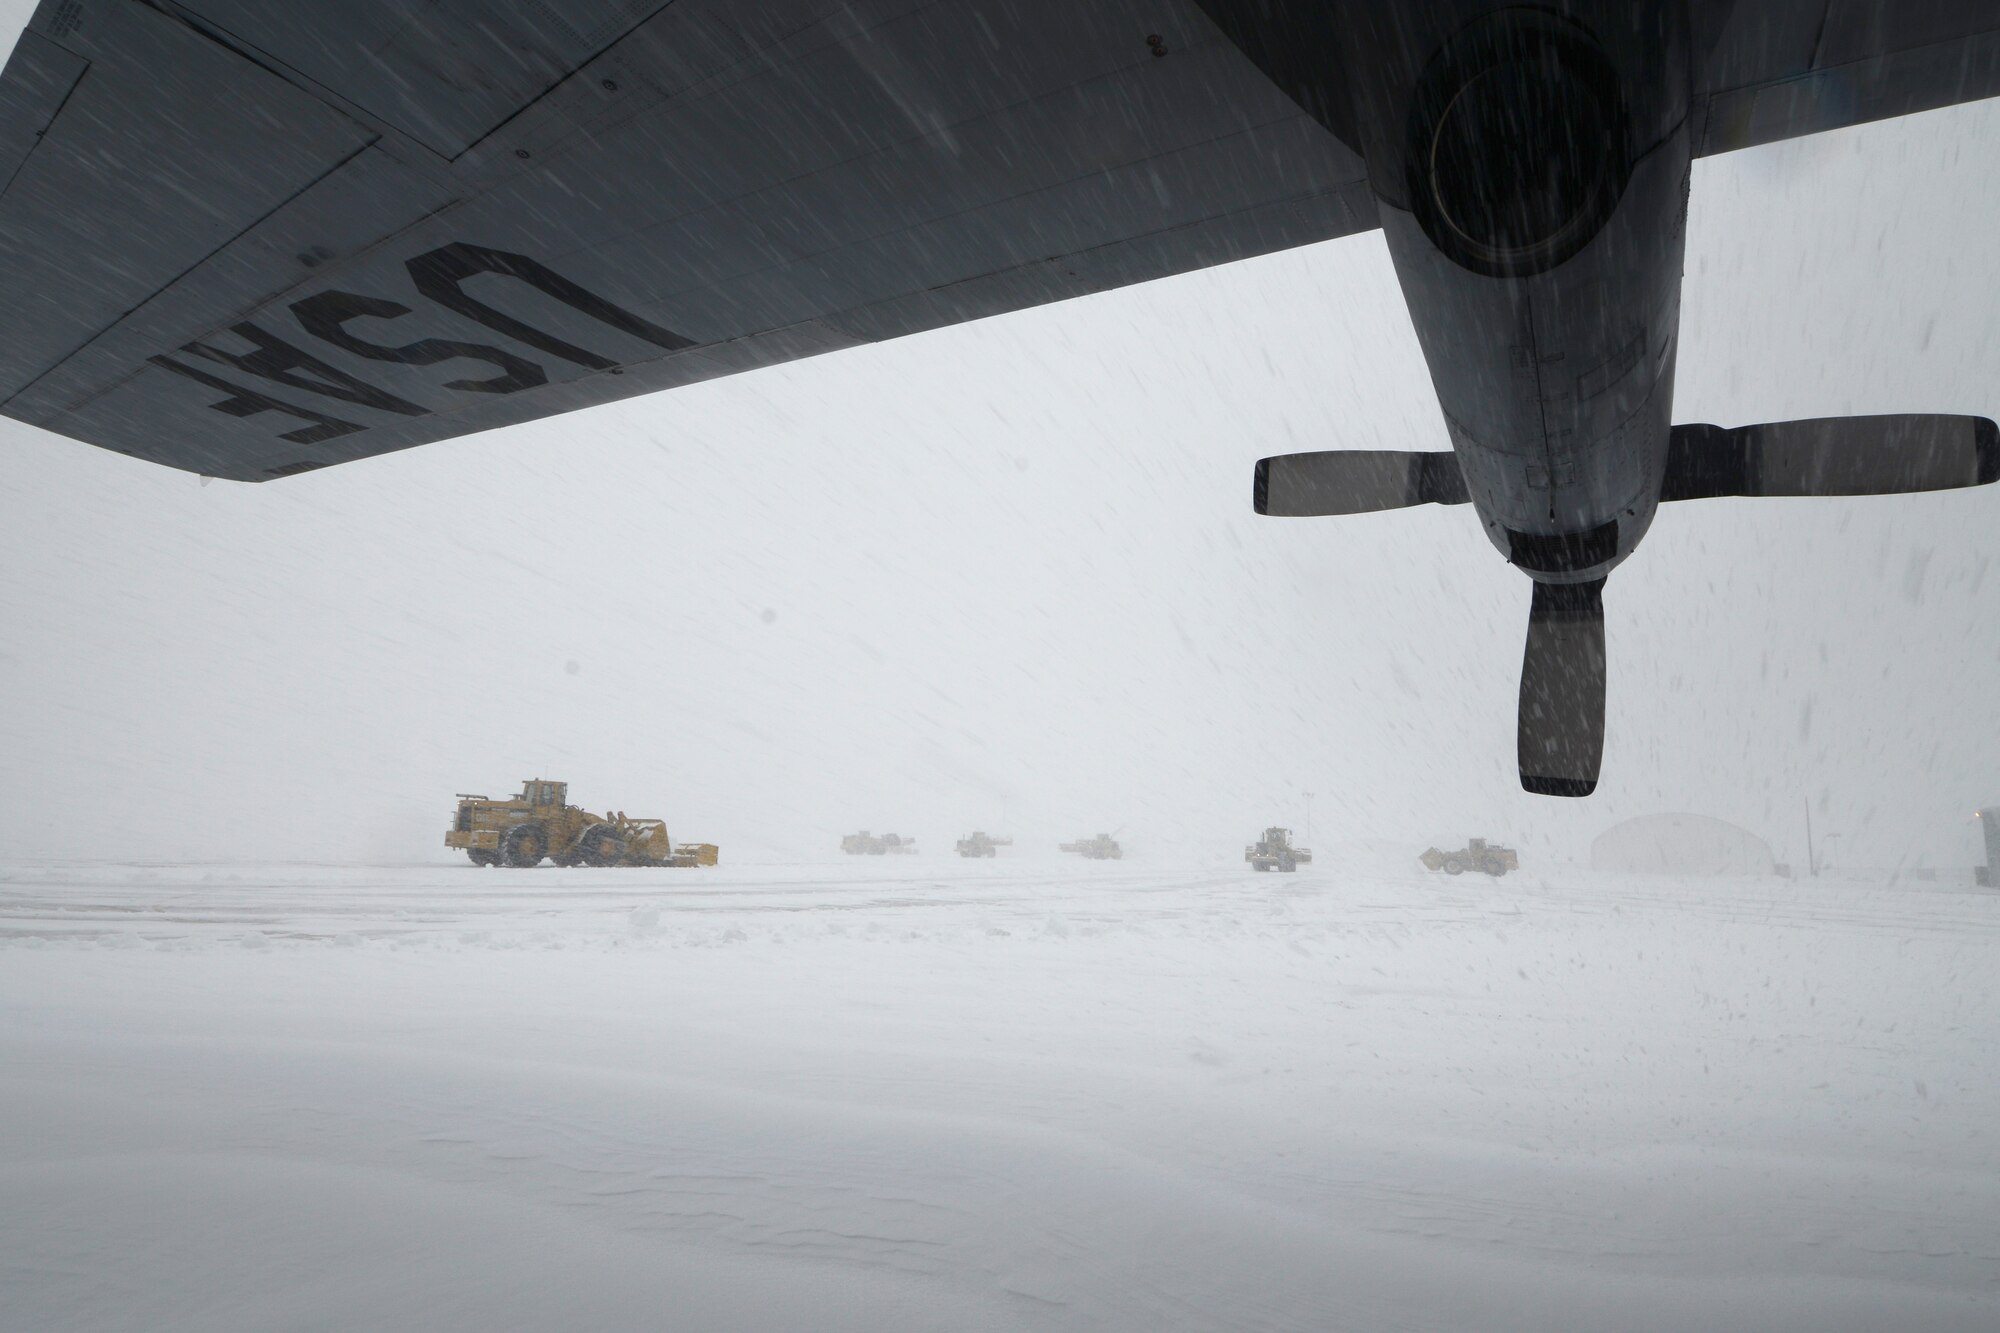 A C-130H assigned to the 103rd Airlift Wing in East Granby, Conn. weathers the storm Feb. 13, 2014, as more than a half dozen machines from the adjacent Bradley International Airport work to clear the rapdily accumulating snow from the aircraft ramp at Bradley Air National Guard Base, East Granby, Conn.  (U.S. Air National Guard photo by Master Sgt. Erin McNamara)